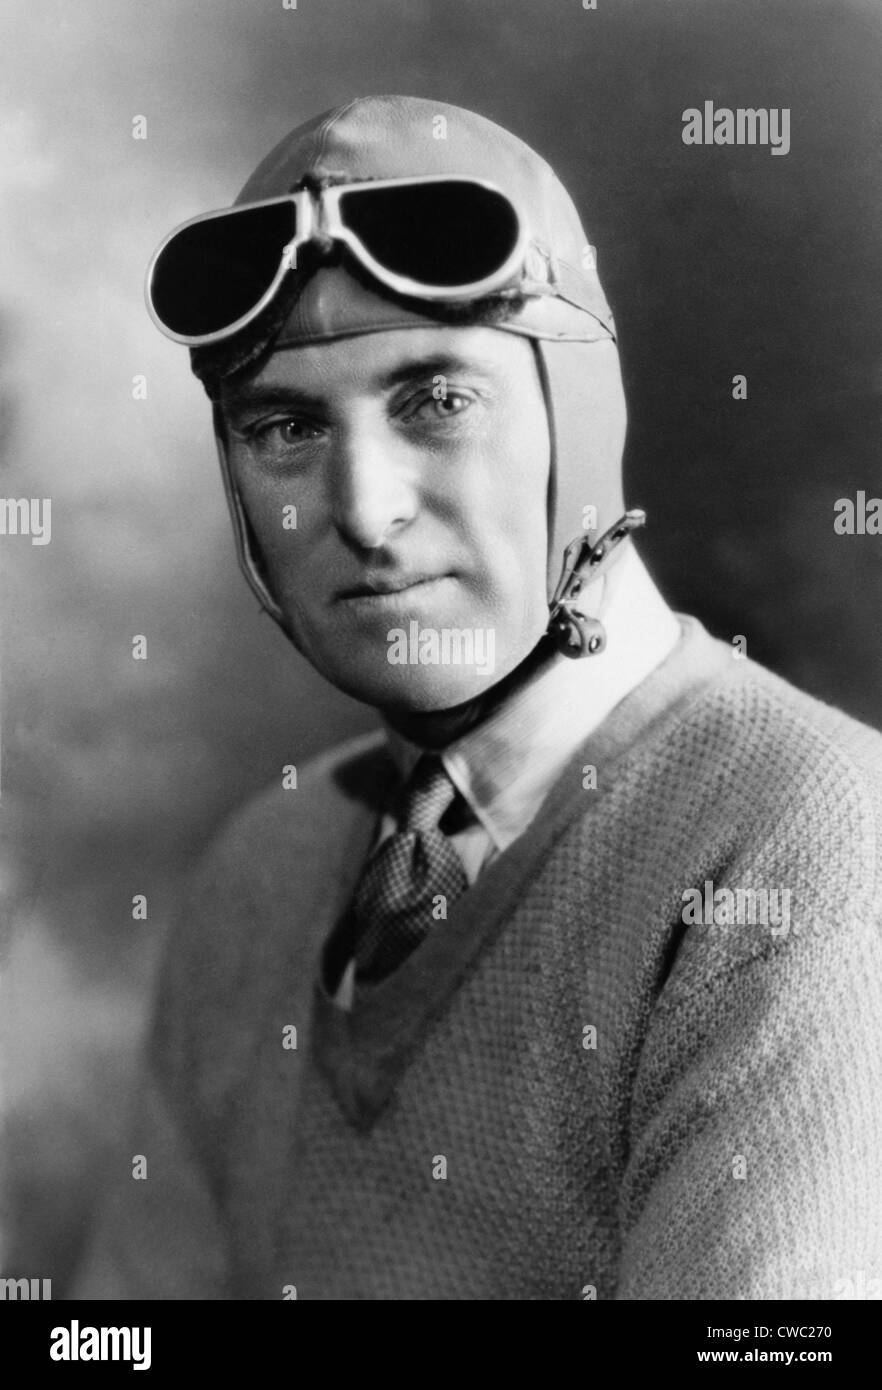 Malcolm Campbell 1885-1948 set the world land and water speed records in 1920s and 1930s. 1931 portrait. LC-USZ62-104073 Stock Photo